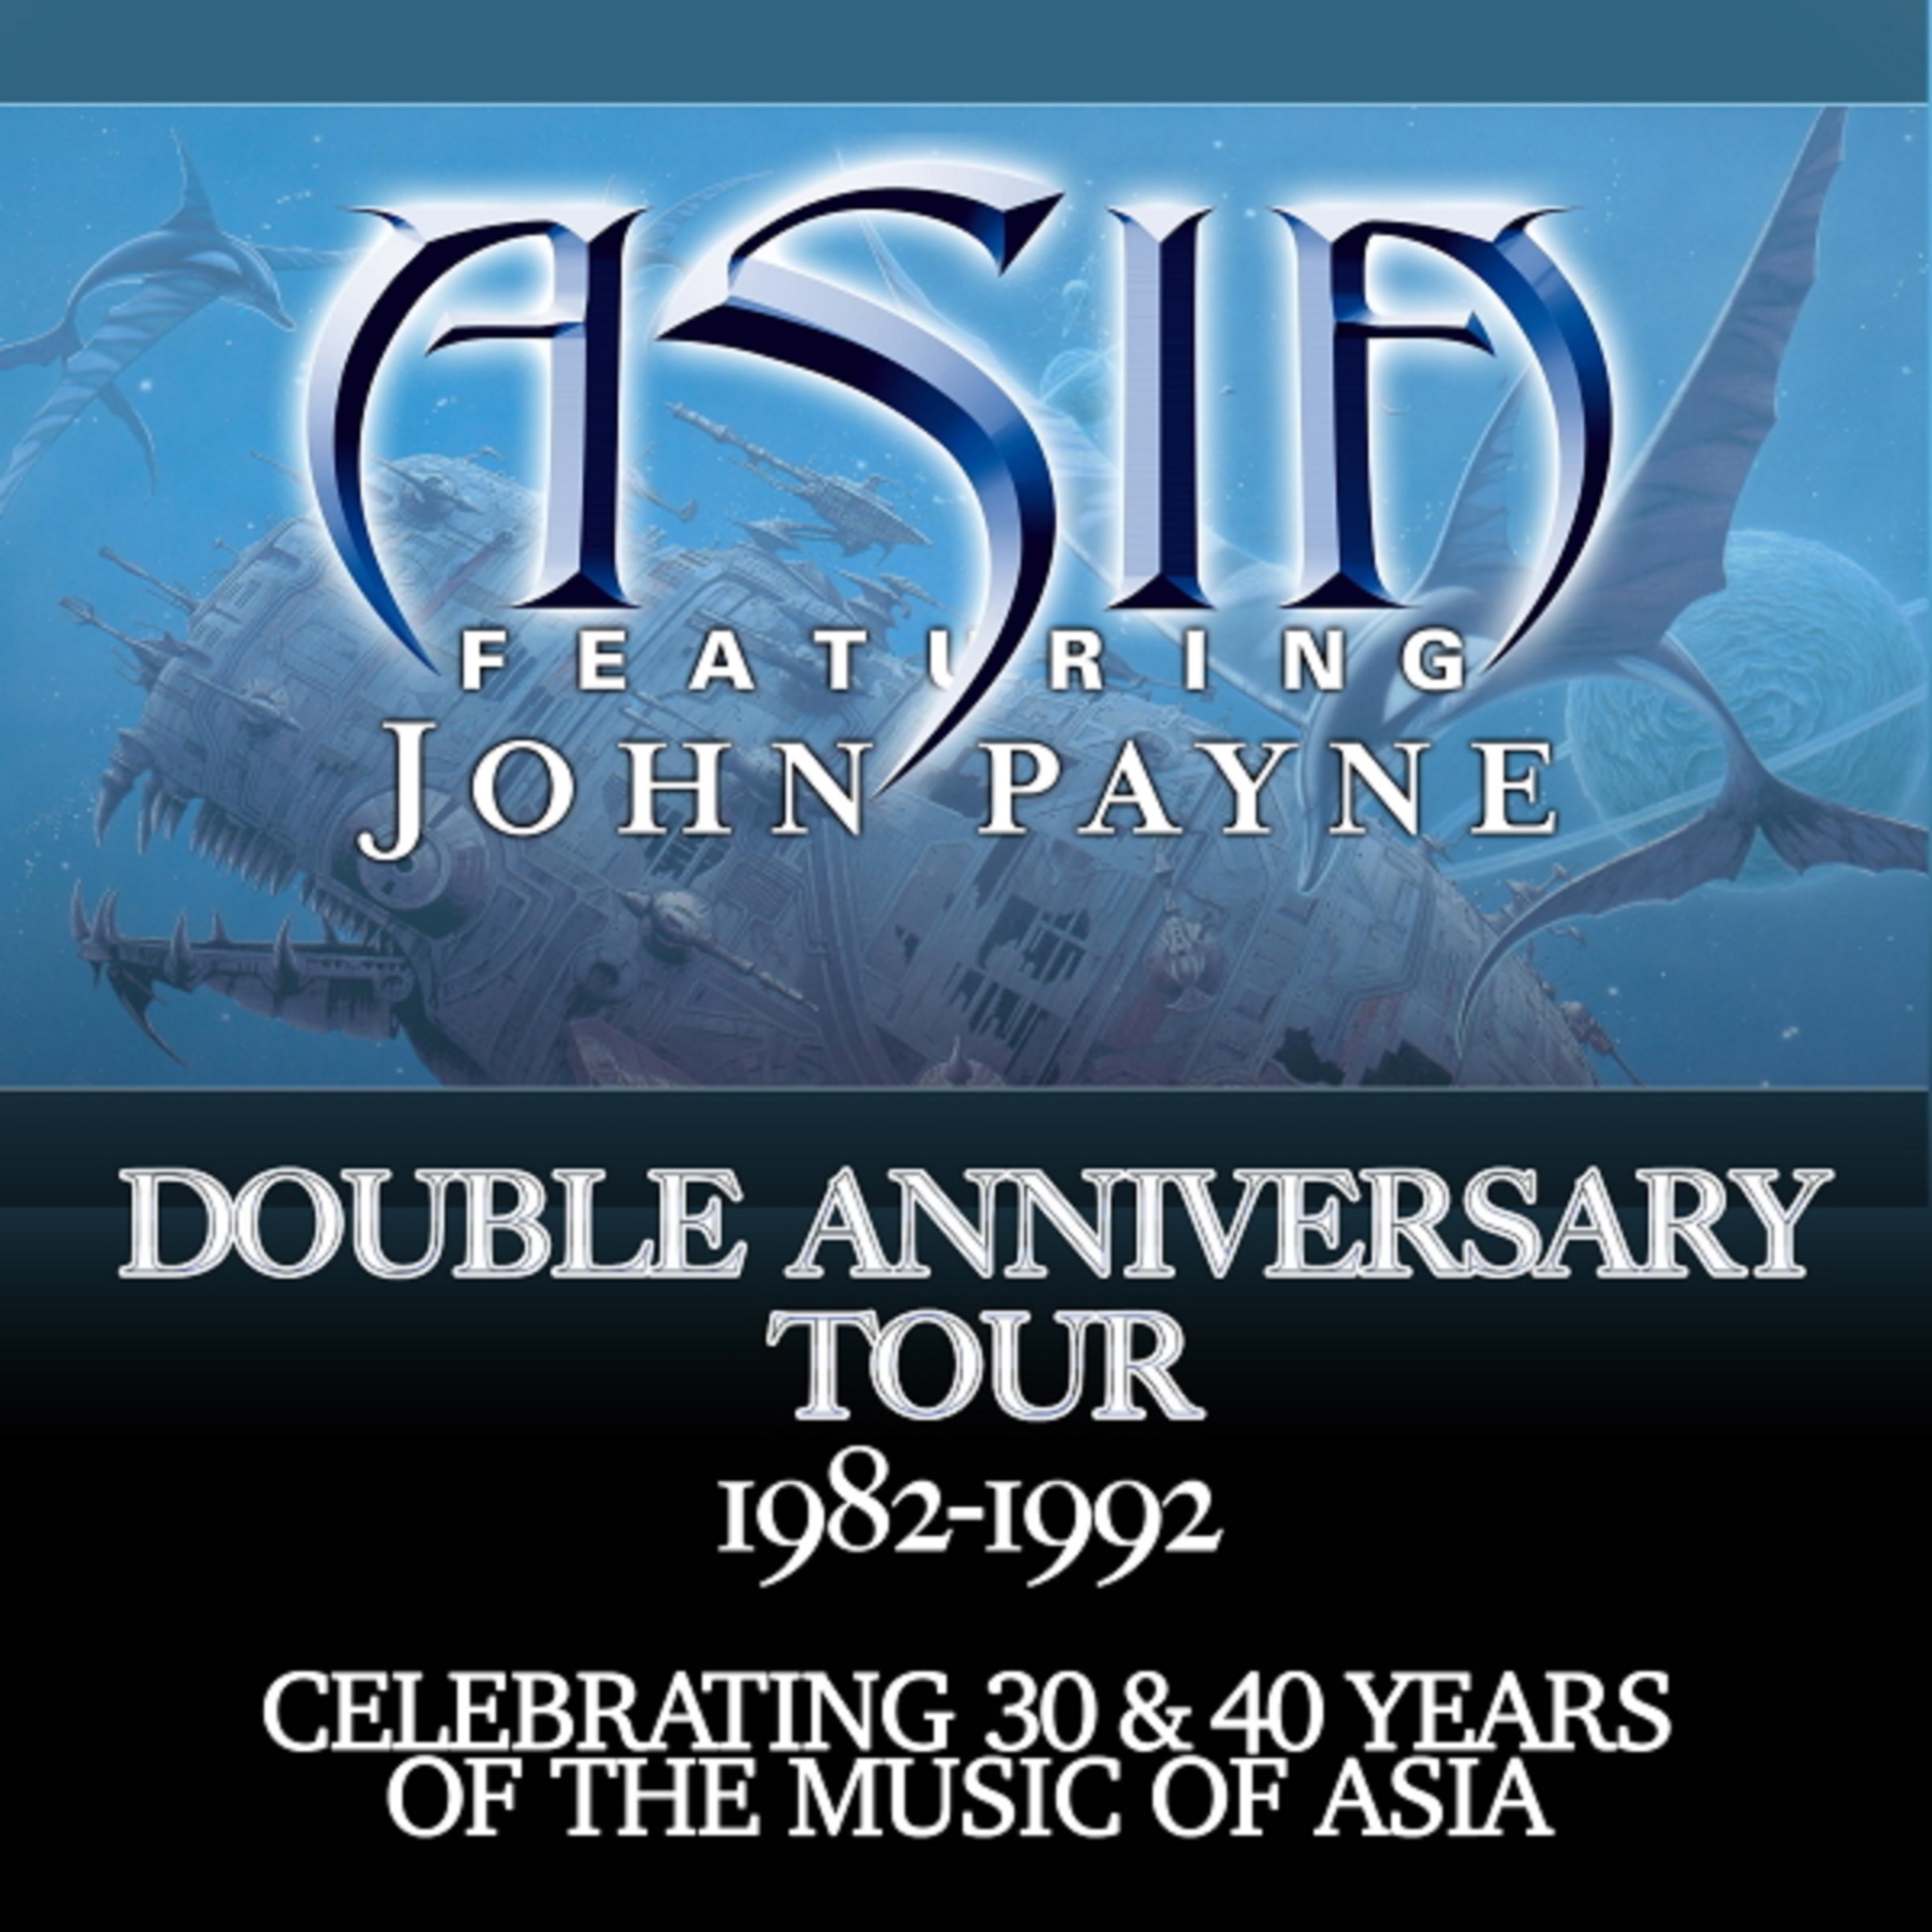 ASIA Featuring John Payne Double Anniversary Tour Celebrating 30 & 40 Years of the Music of ASIA